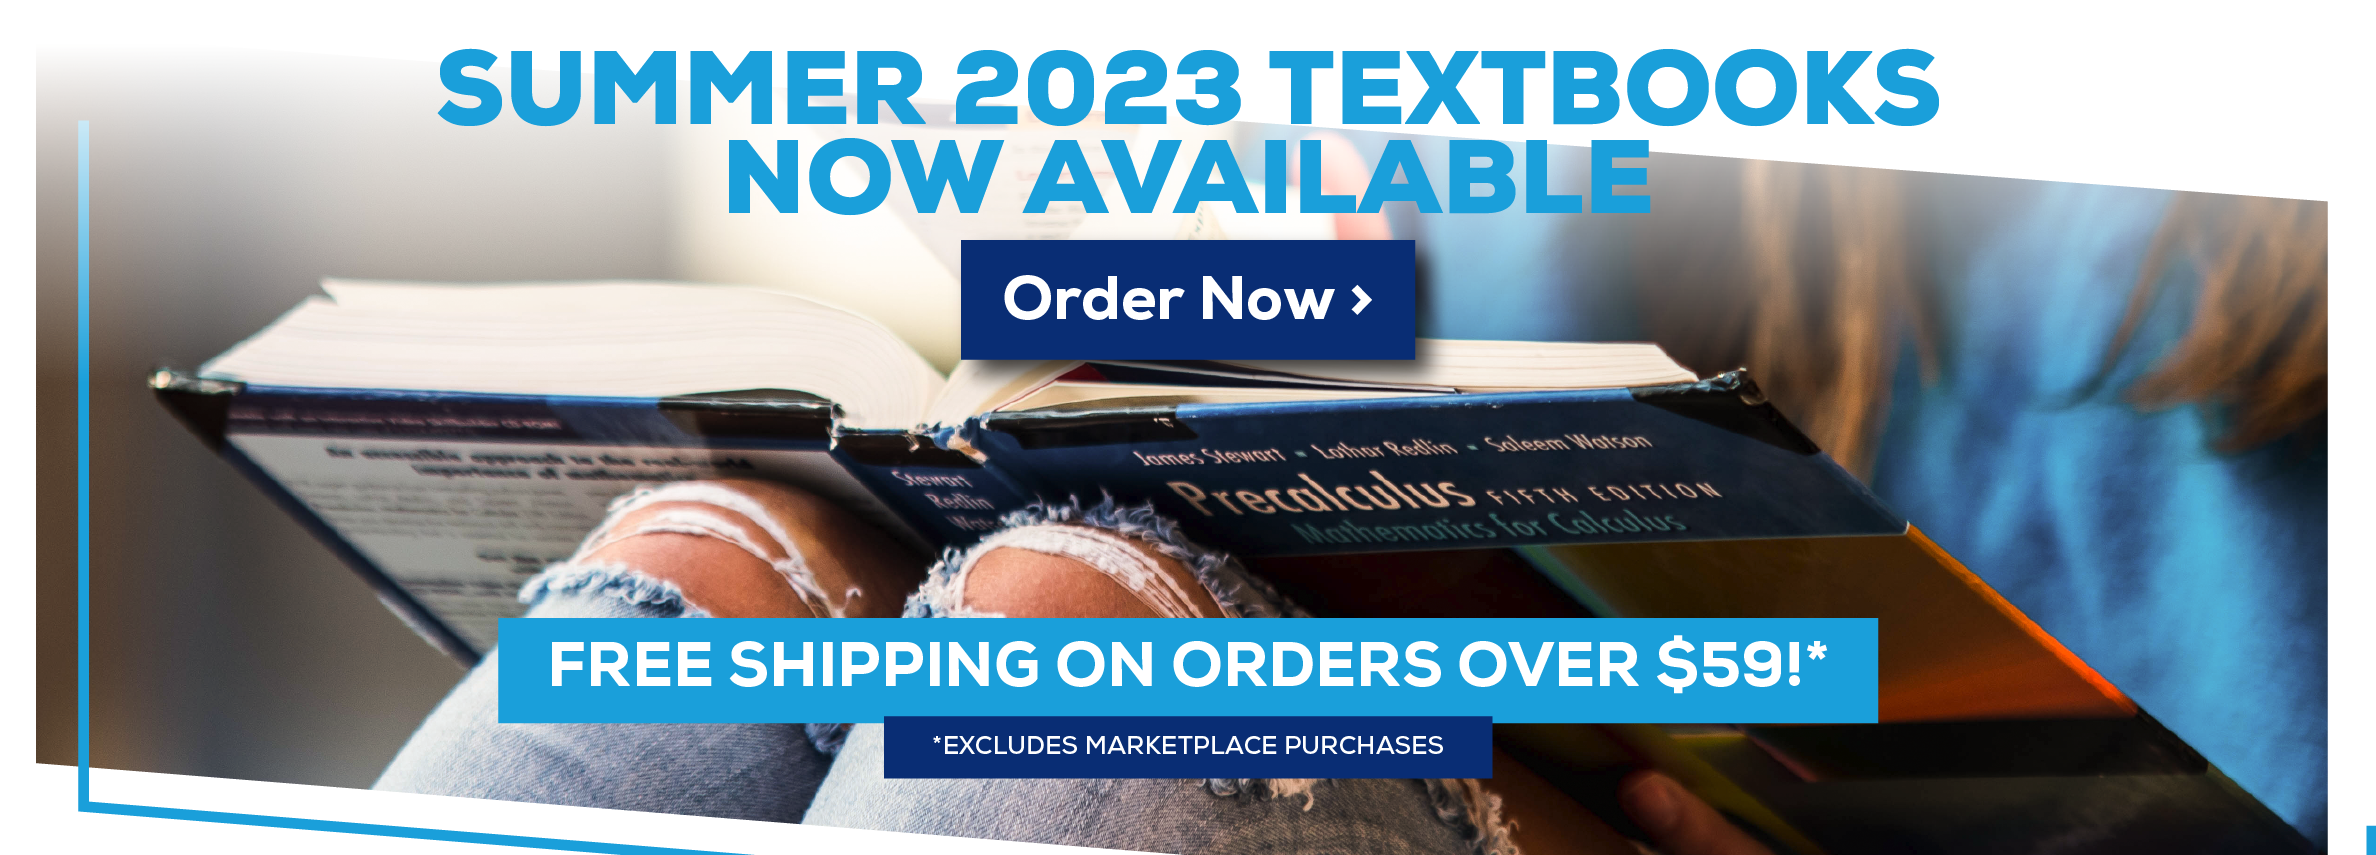 SUMMER 2023 TEXTBOOKS NOW AVAILABLE Order Now Ã‚Â» Lahar getlin - Soleom Warson 10S FISTA CONTION Nor Coladis FREE SHIPPING ON ORDERS OVER $59!* *EXCLUDES MARKETPLACE PURCHASES